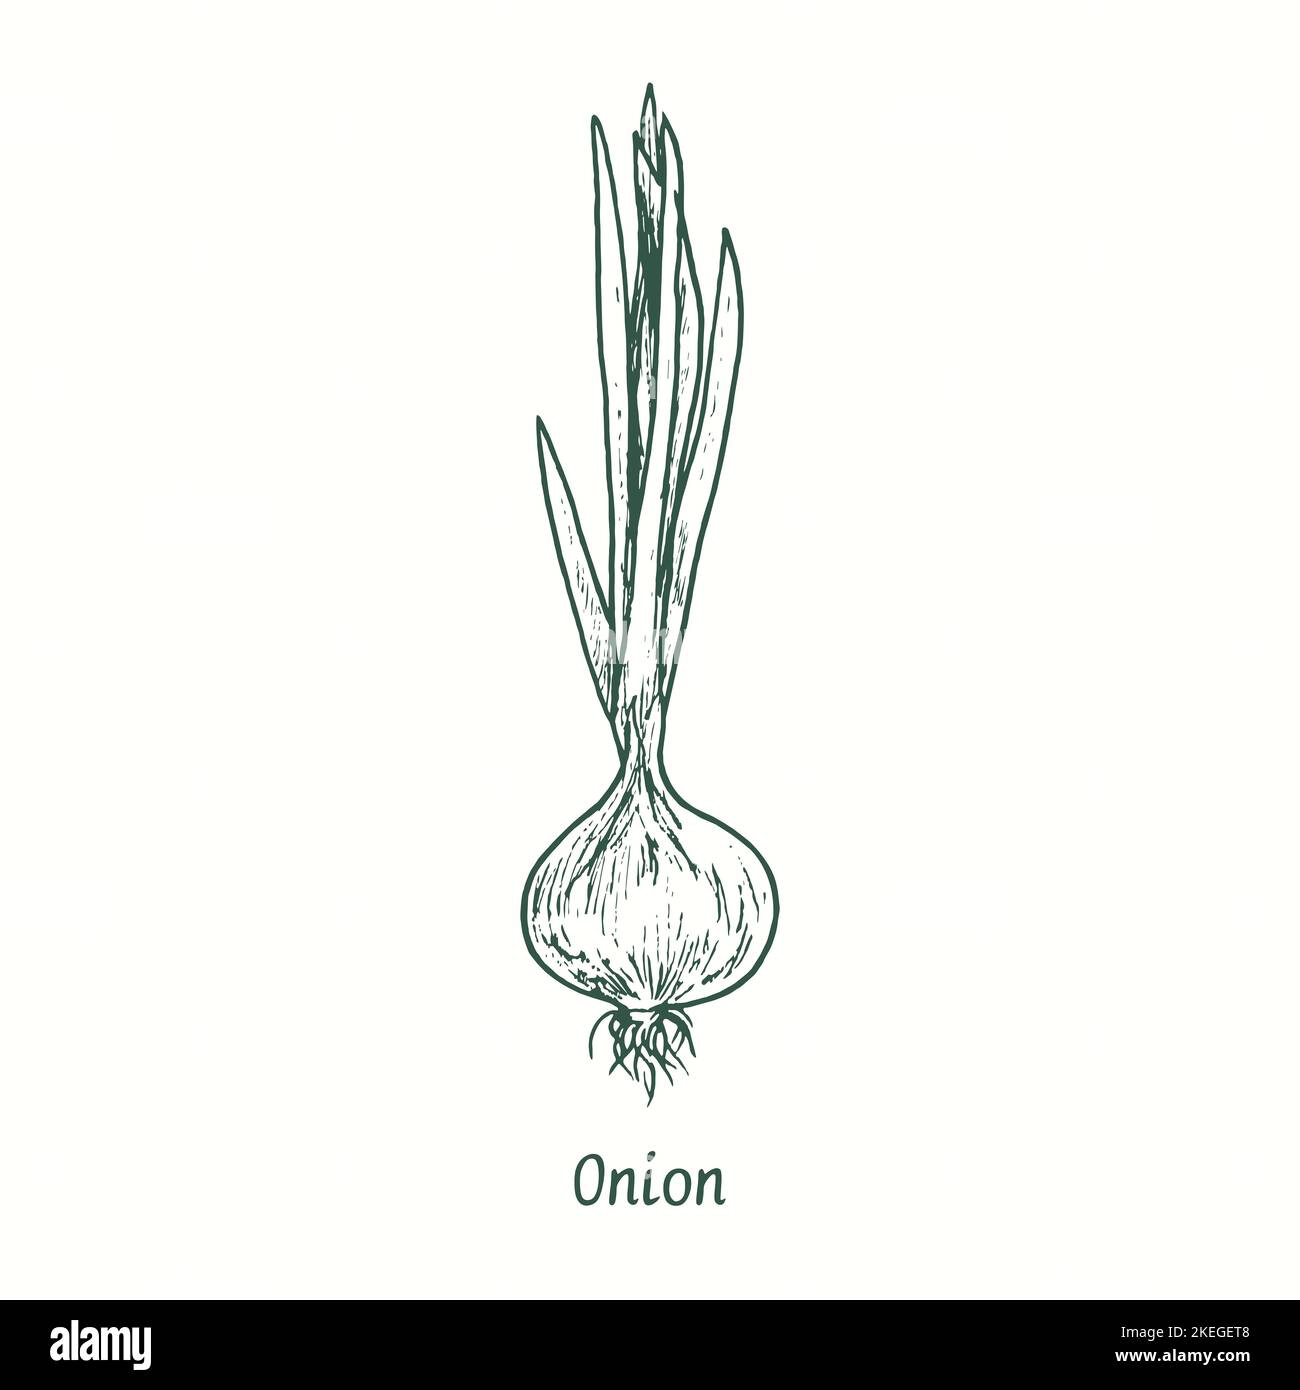 Onion.  Ink black and white doodle drawing in woodcut style Stock Photo